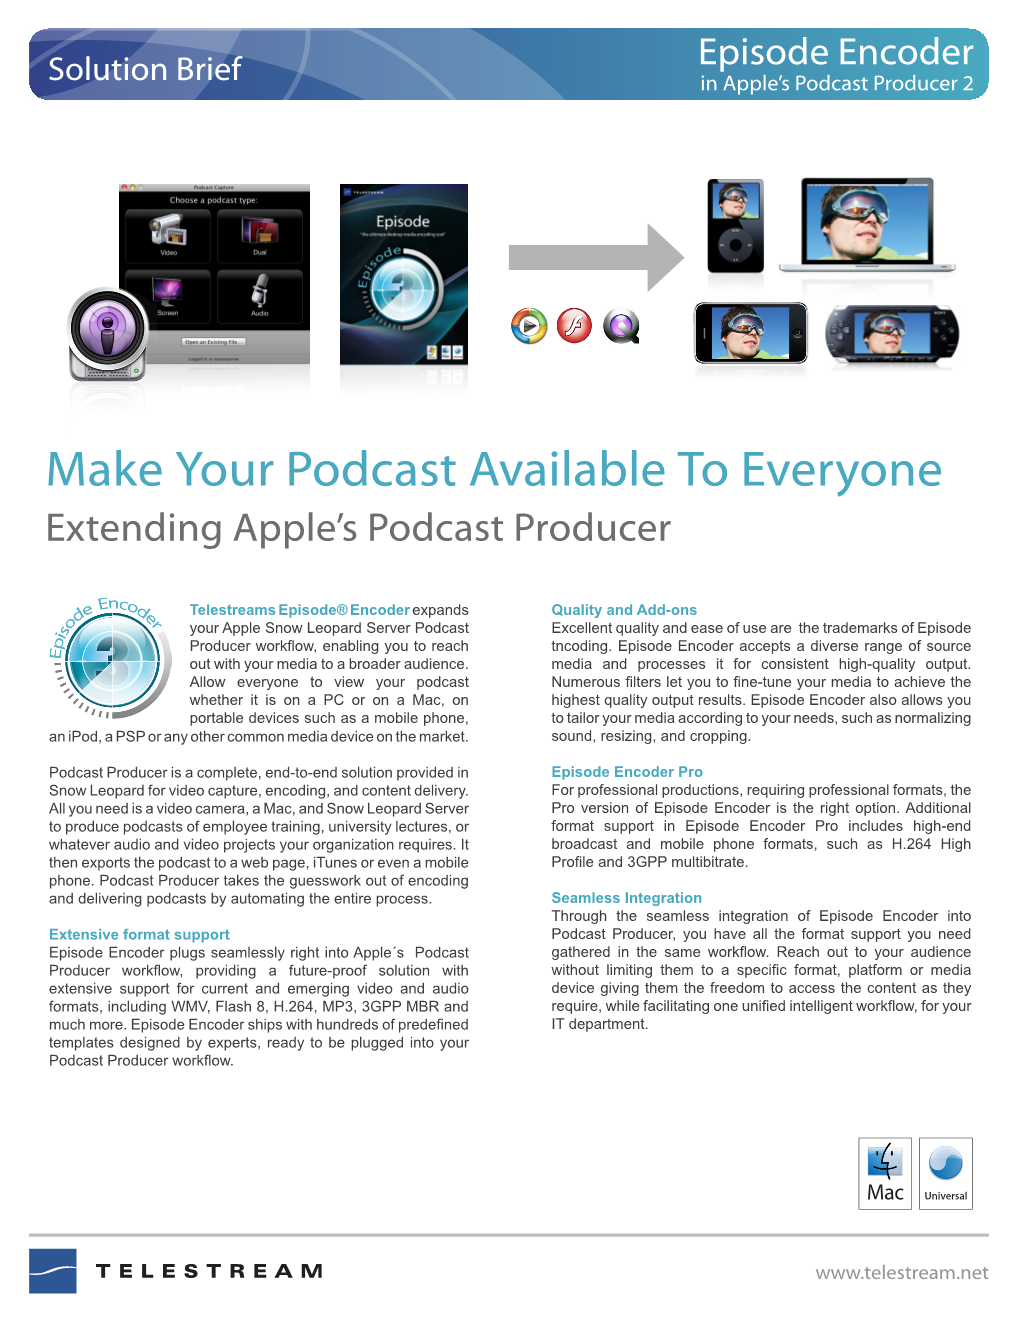 Make Your Podcast Available to Everyone Screenflow